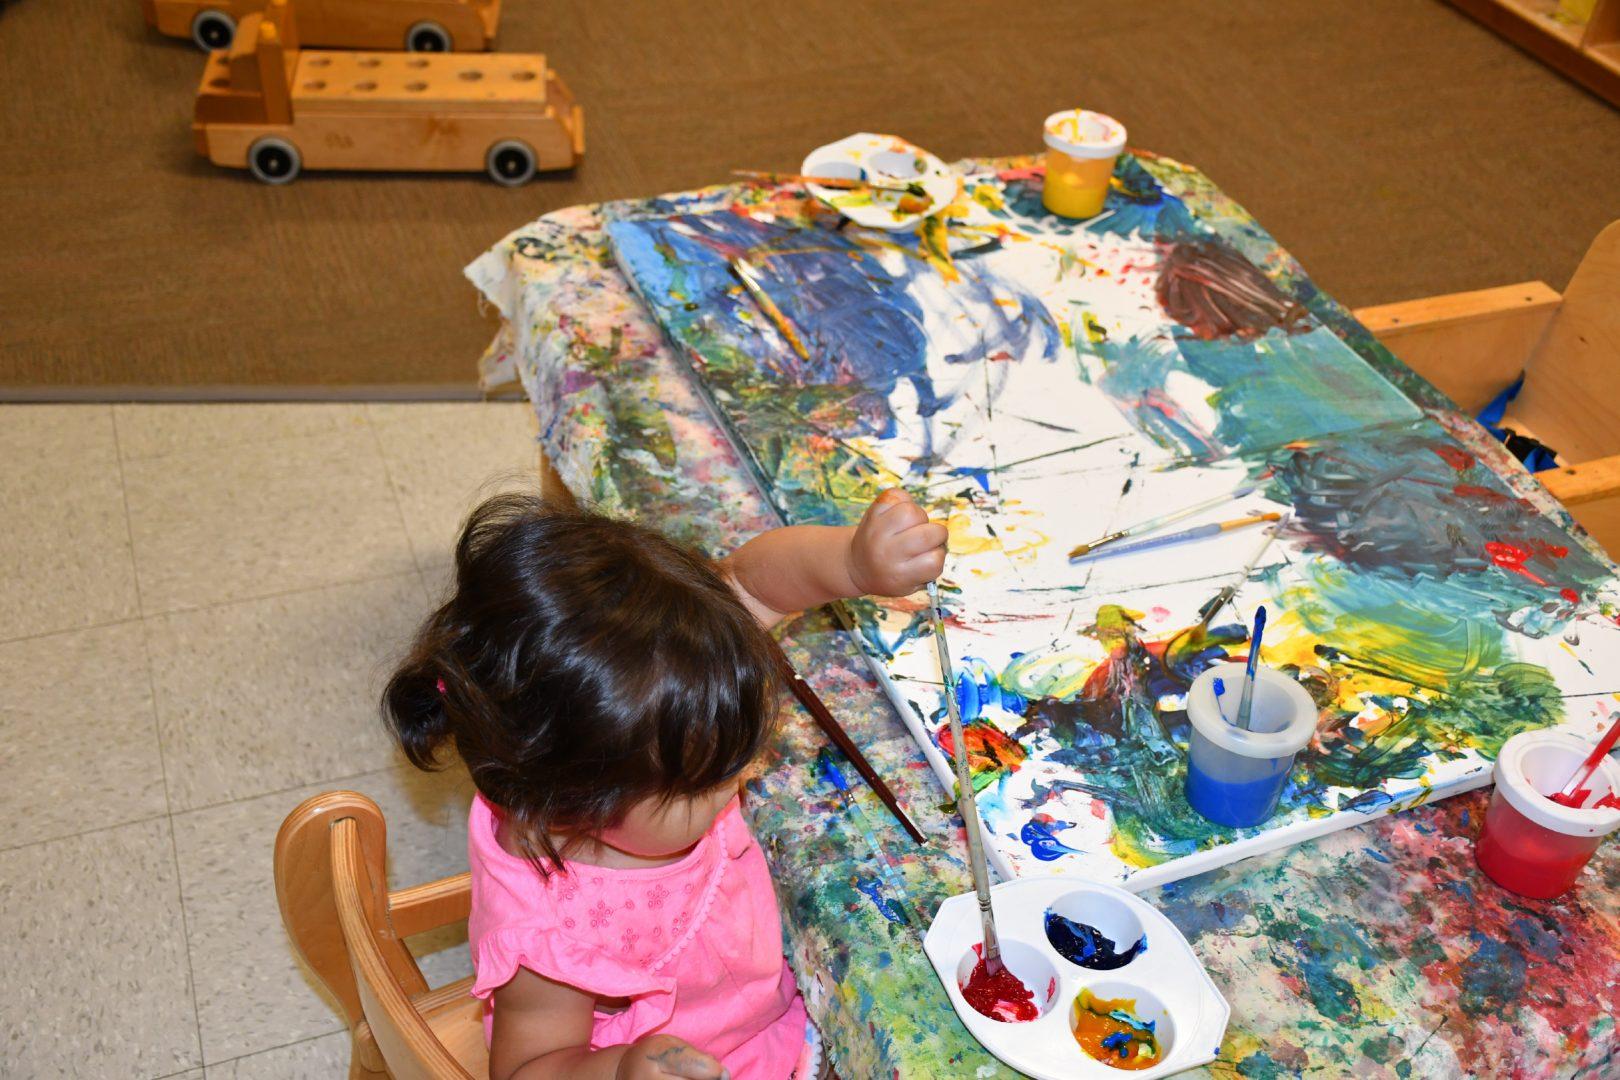 A child explores with paint. Fresno State is expanding an infant center to make room for more children in an attempt to meet the growing needs of students and staff. (Connie Mosher, Master Teacher at the Joyce M. Huggins Early Education Center)